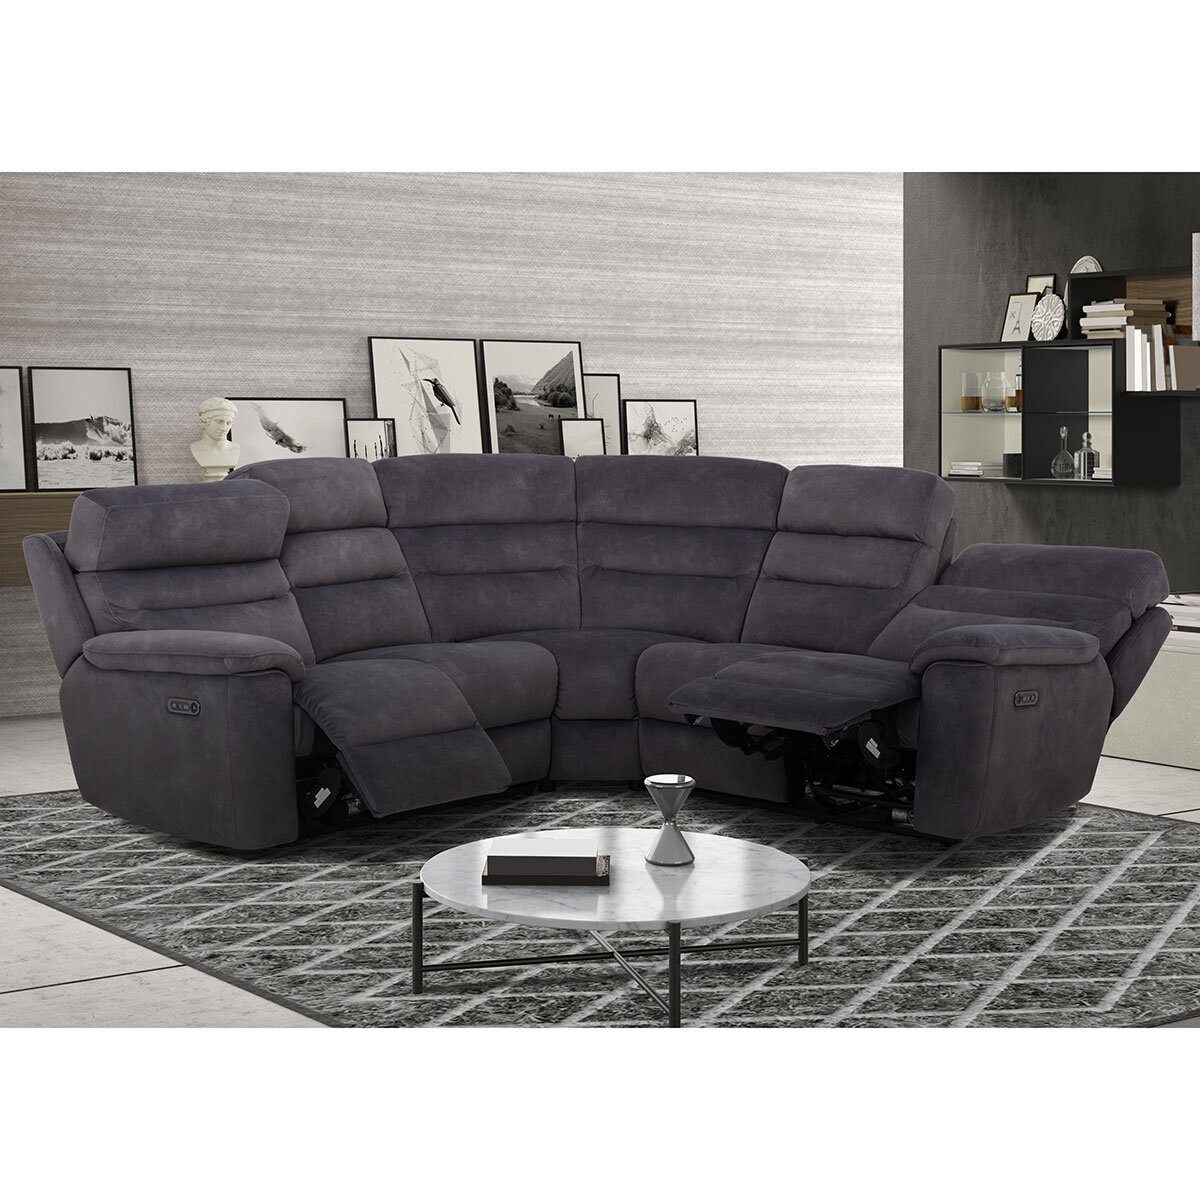 Ellis Grey Fabric Power Reclining Sectional Sofa with Power Headrests